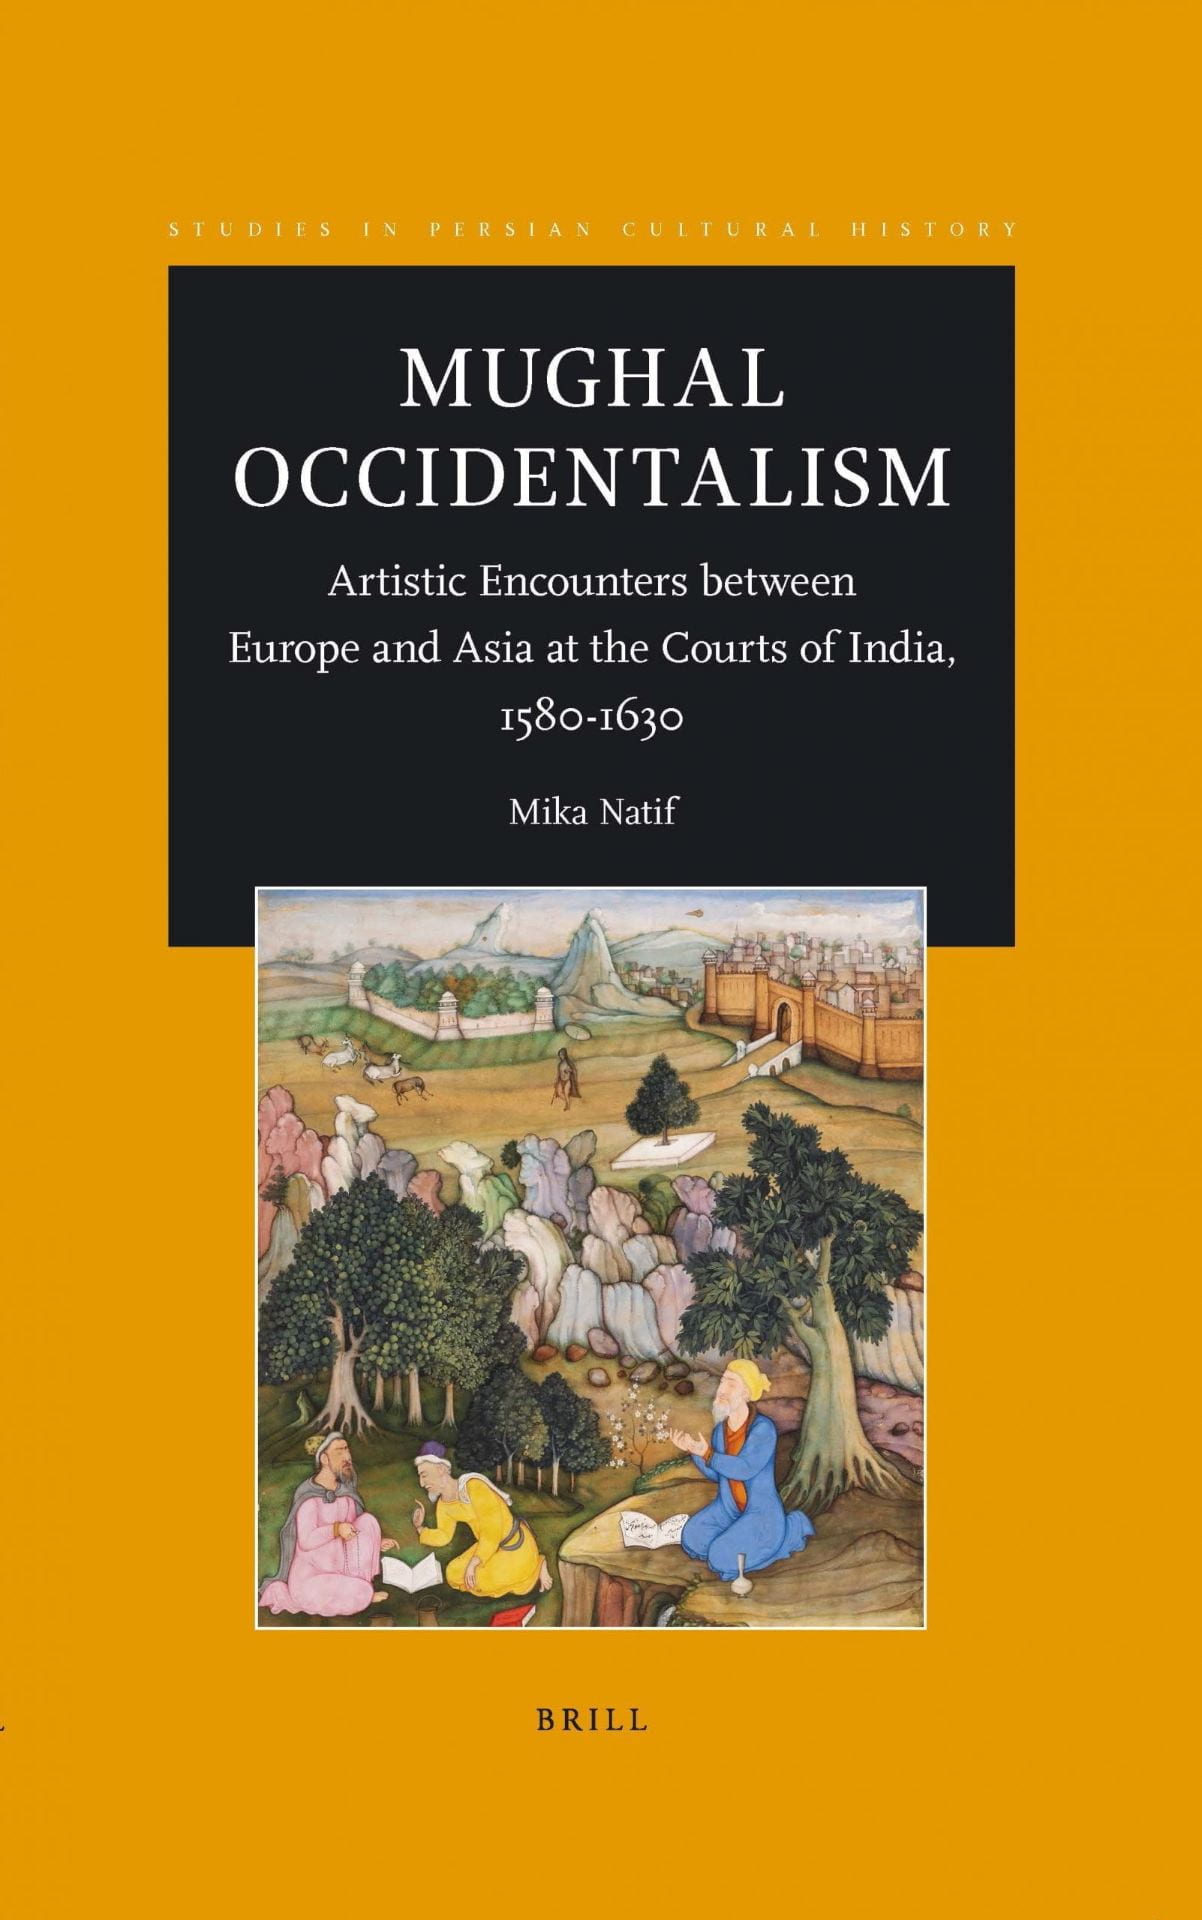 book cover with old painting from the Mughal Empire; text: Mughal Occidentalism: Artistic Encounters between Europe and Asia at the Courts of India, 1580-1630 by Mika Natif